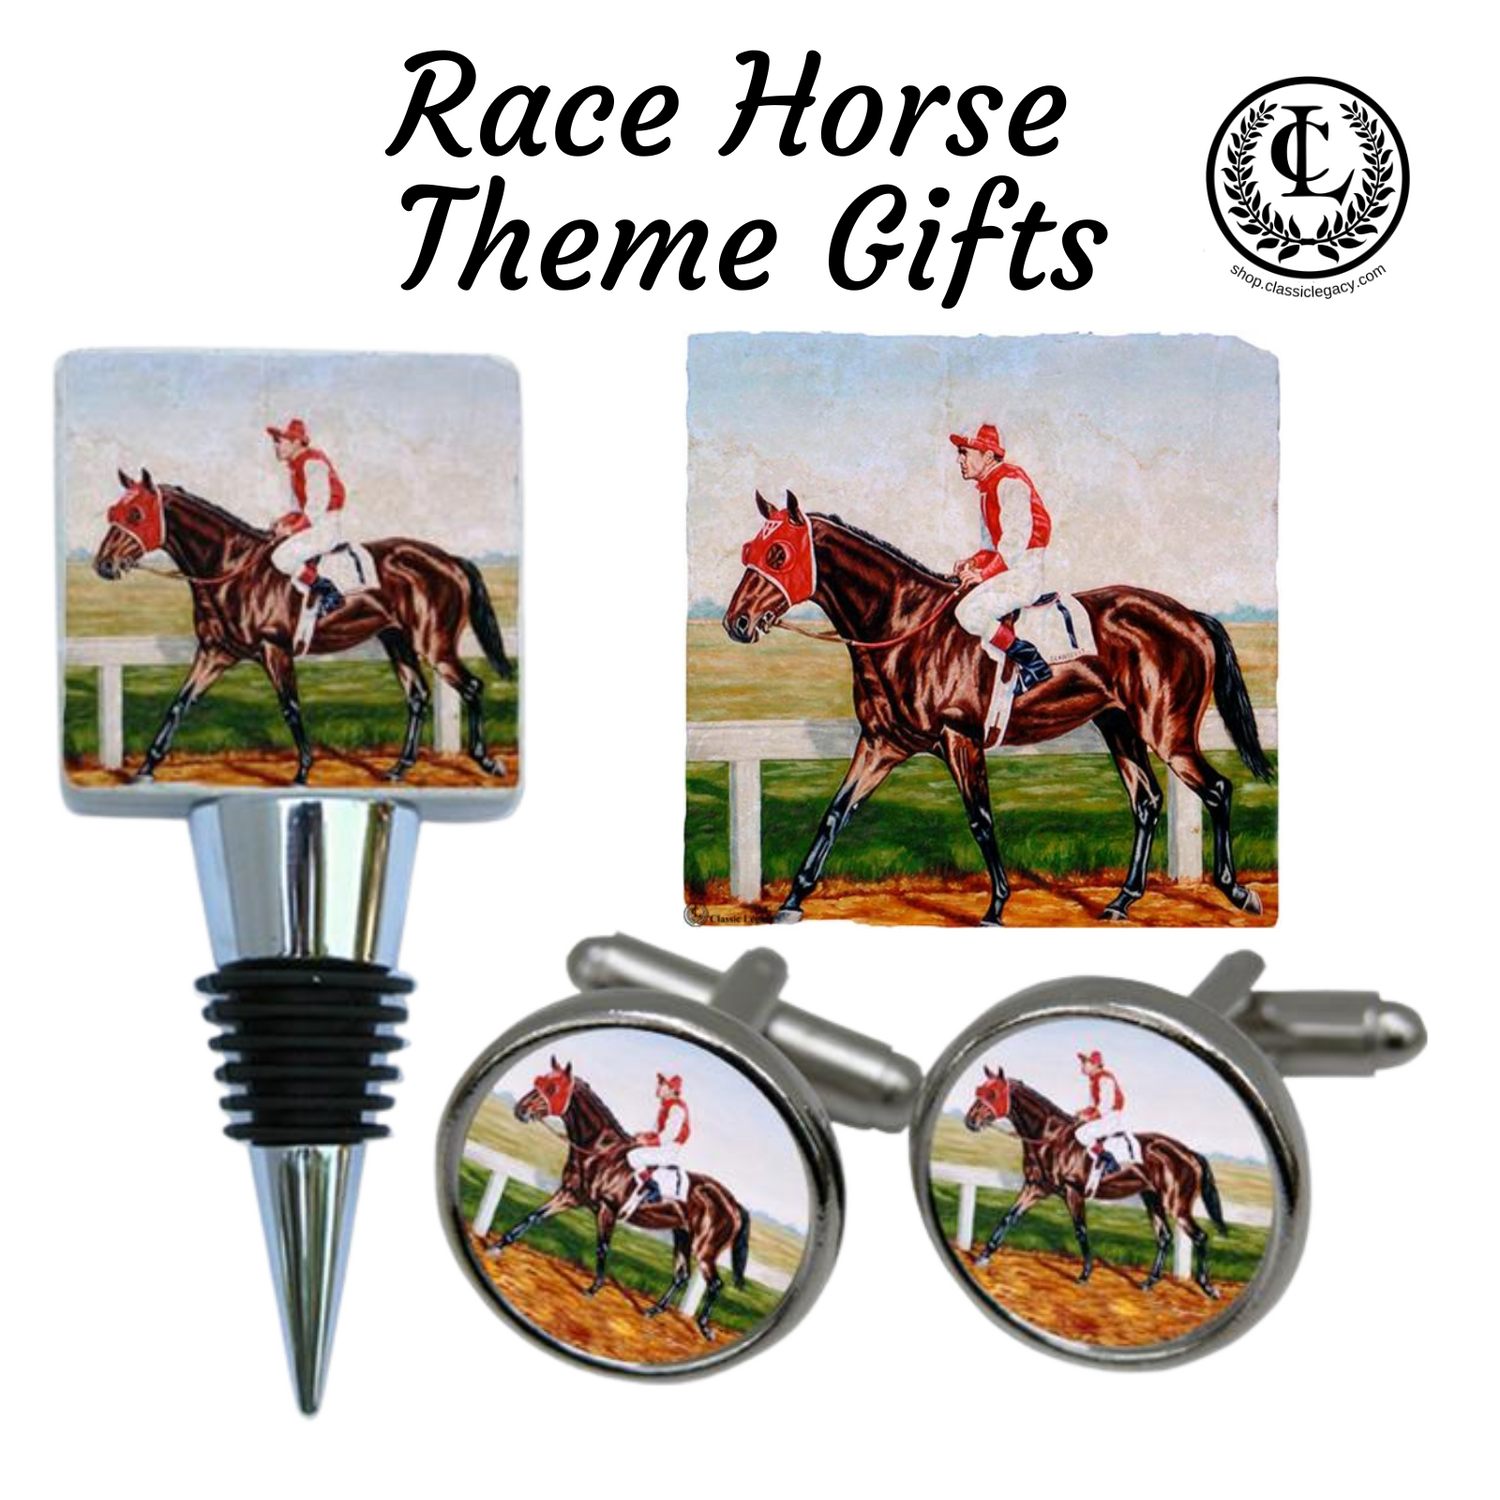 Racehorse Gifts and Jewelry